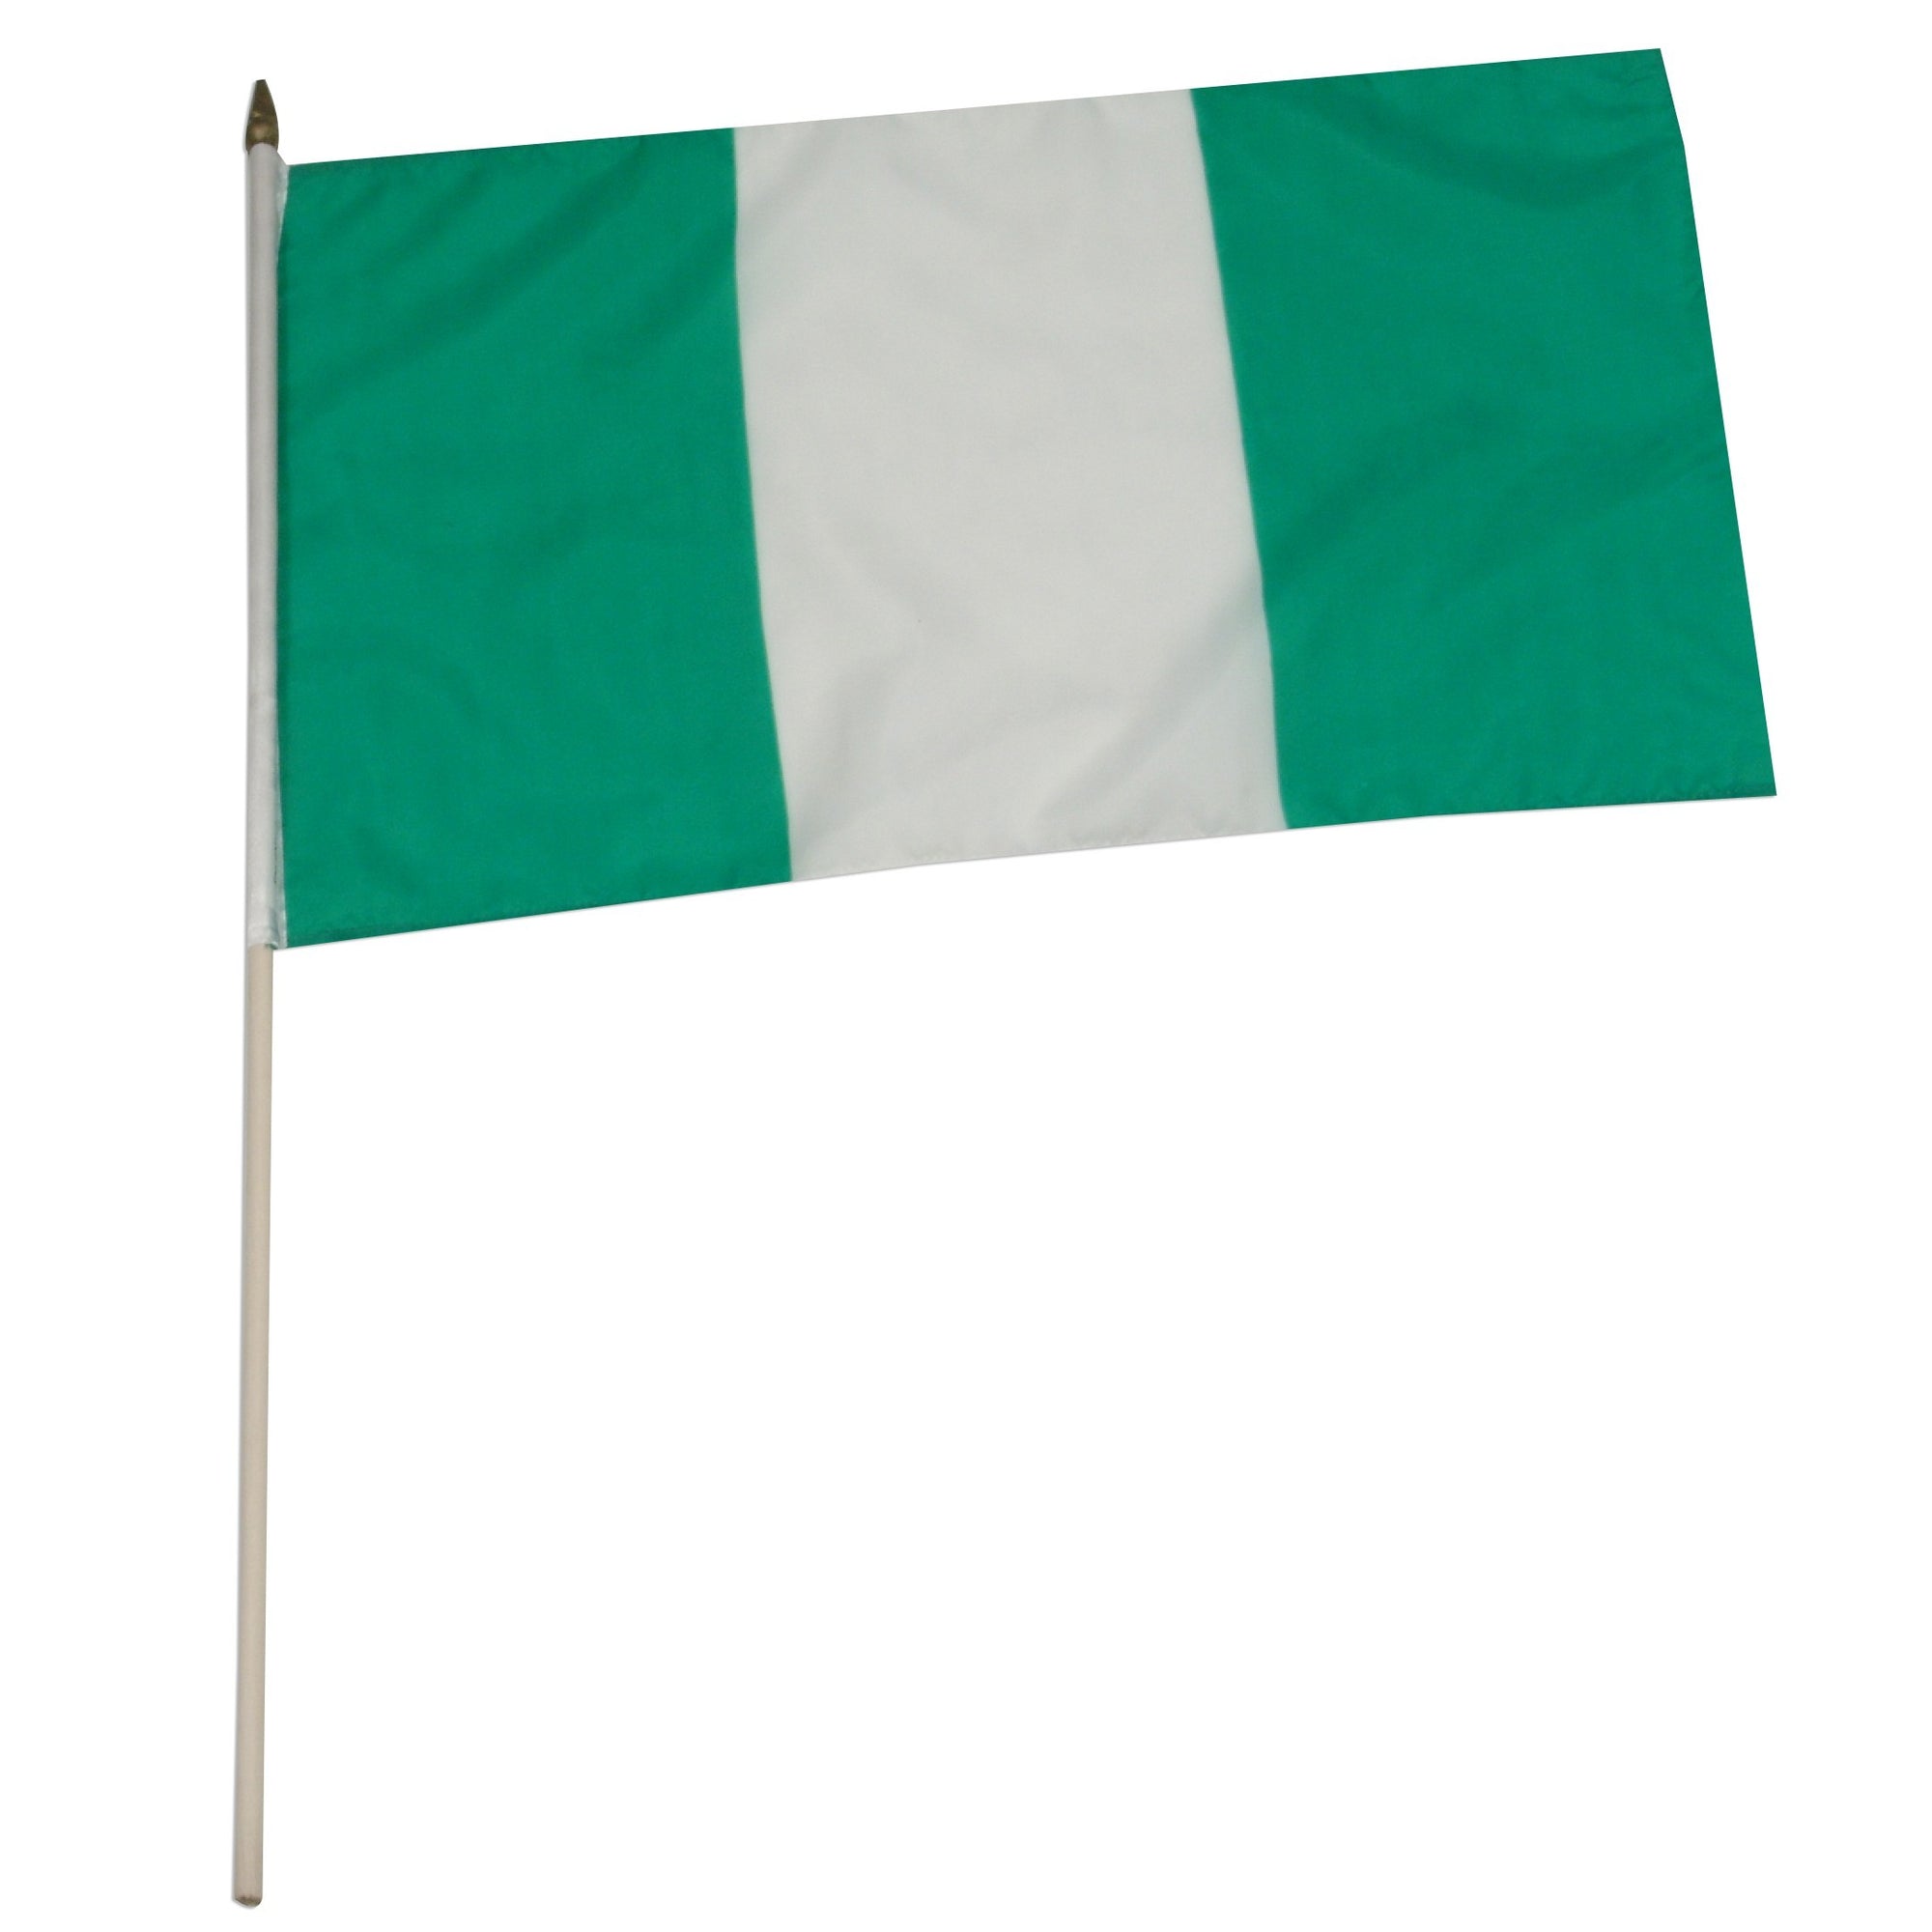 Nigeria flags for sale 1-800 flags